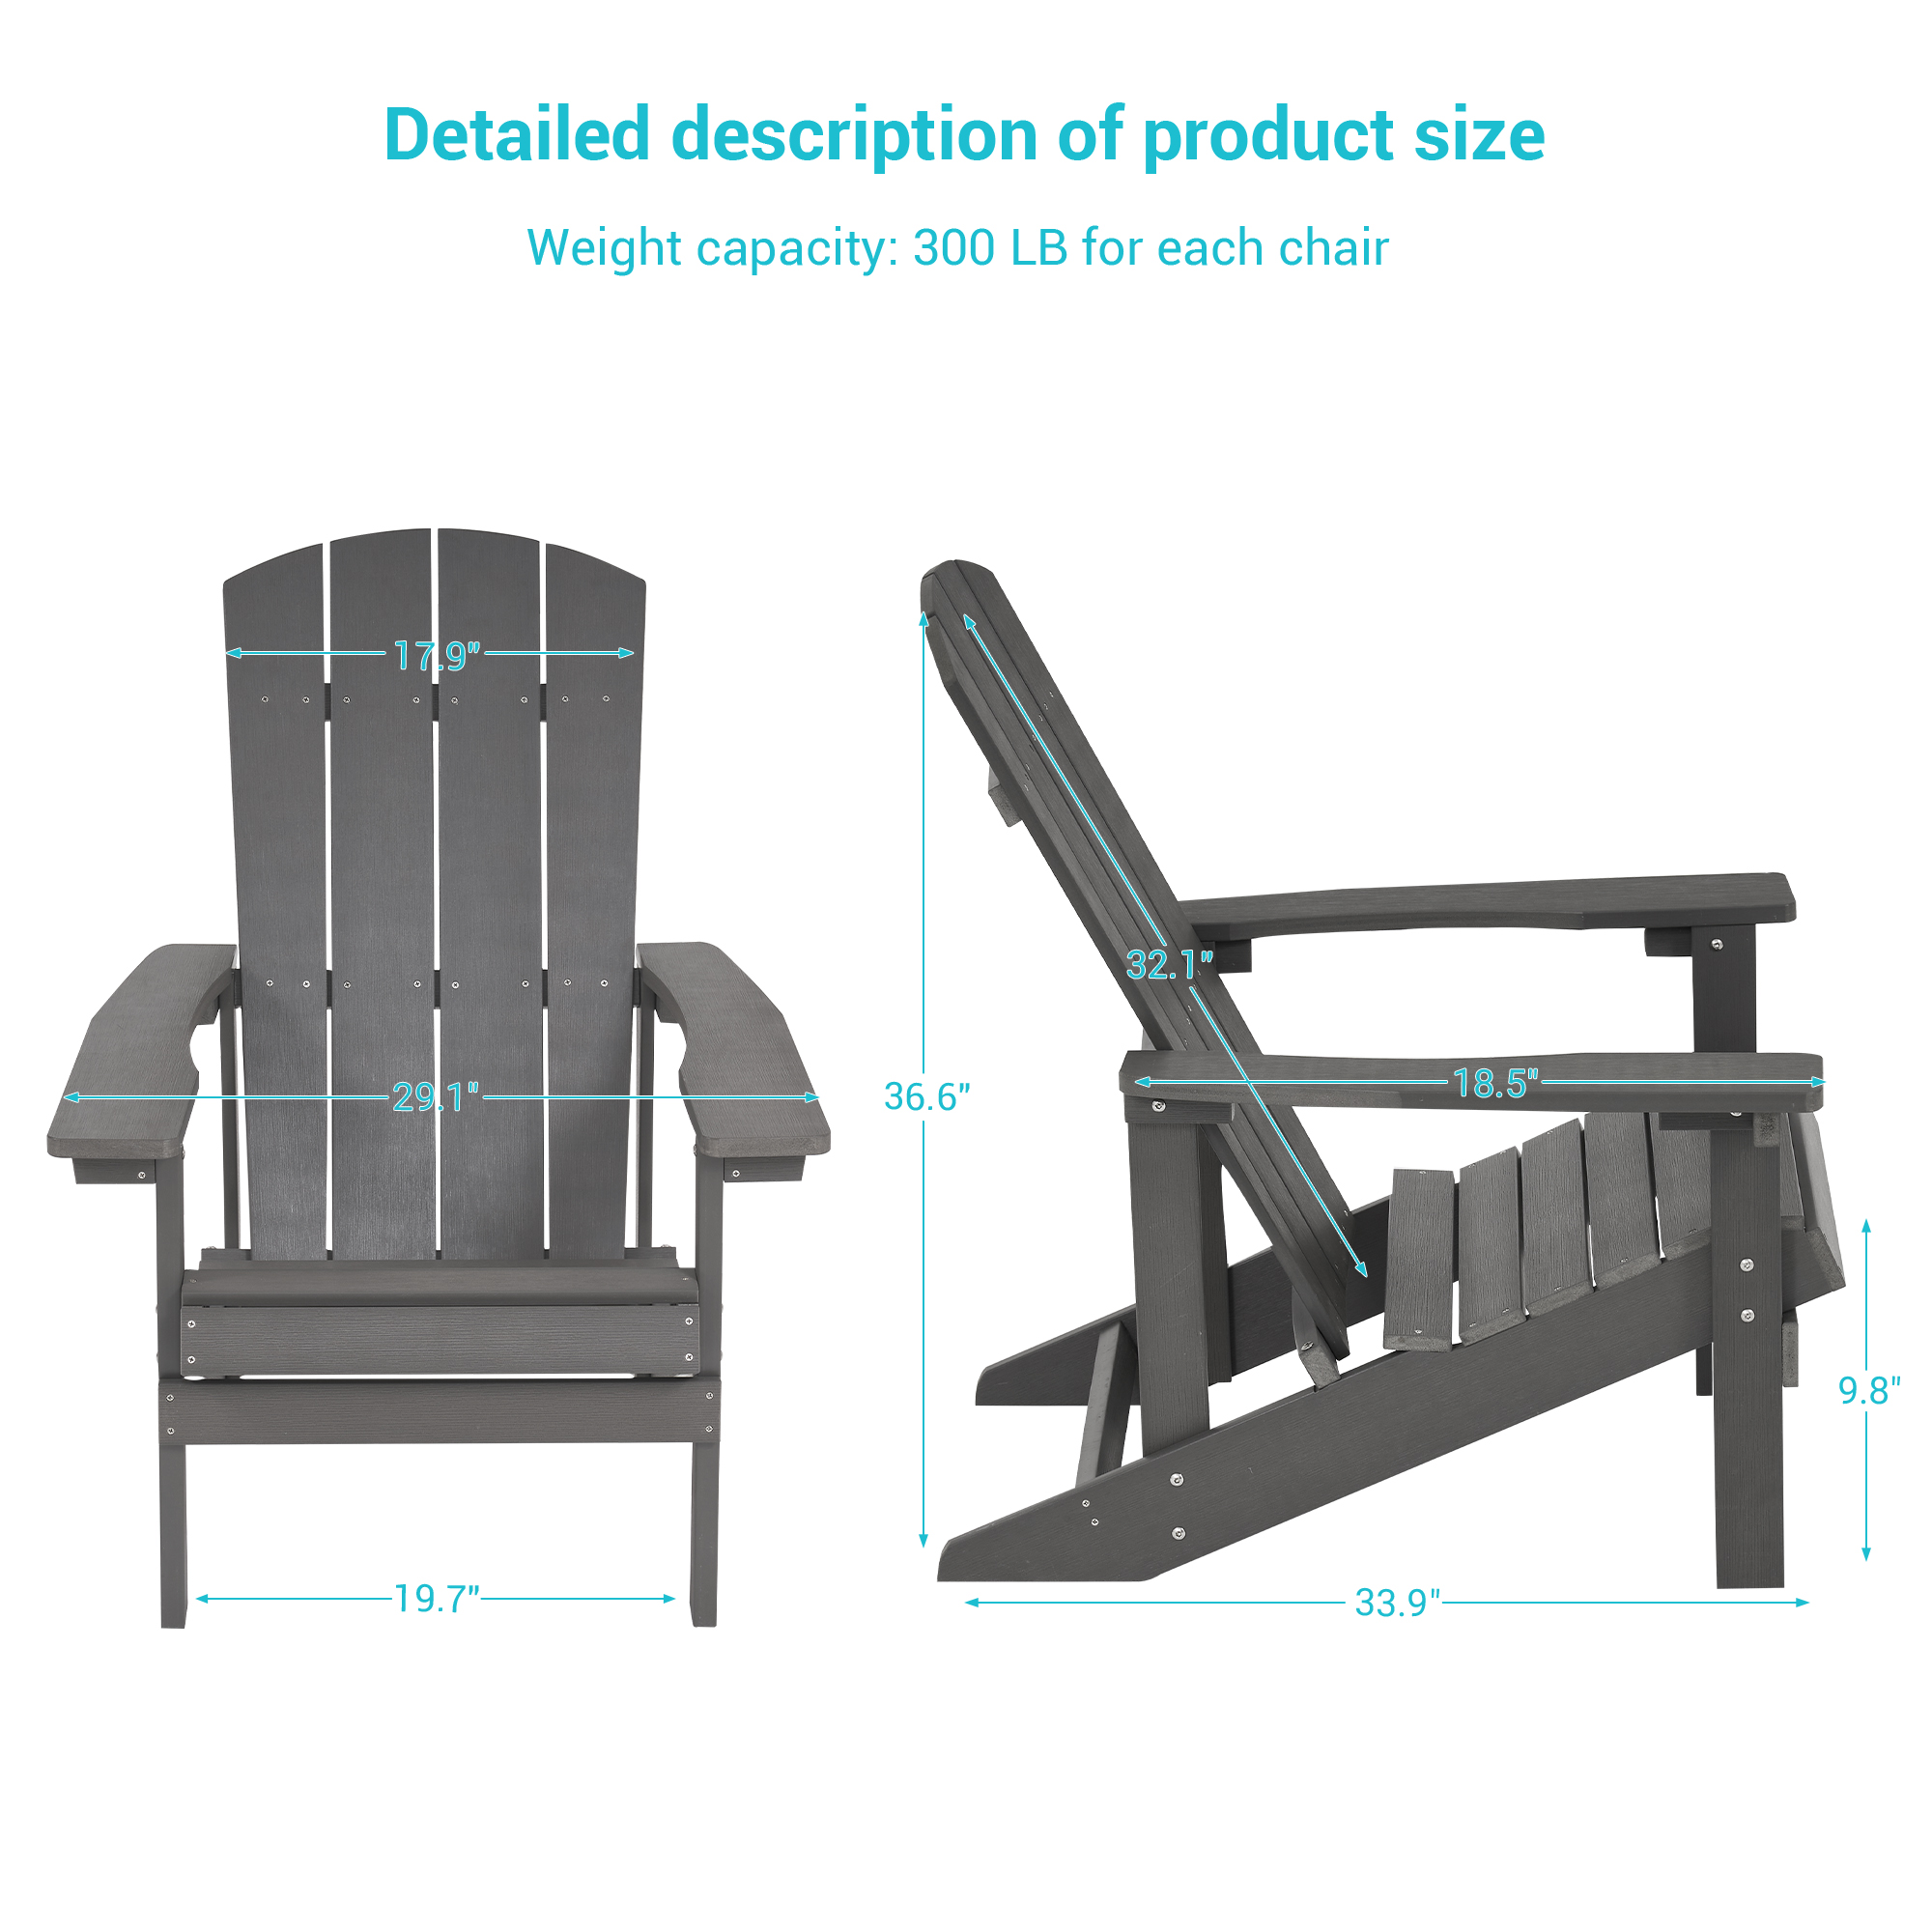 CHYVARY 1 Peak Adirondack Chair, Fire Pit Outdoor Patio Furniture,Gray - image 3 of 7